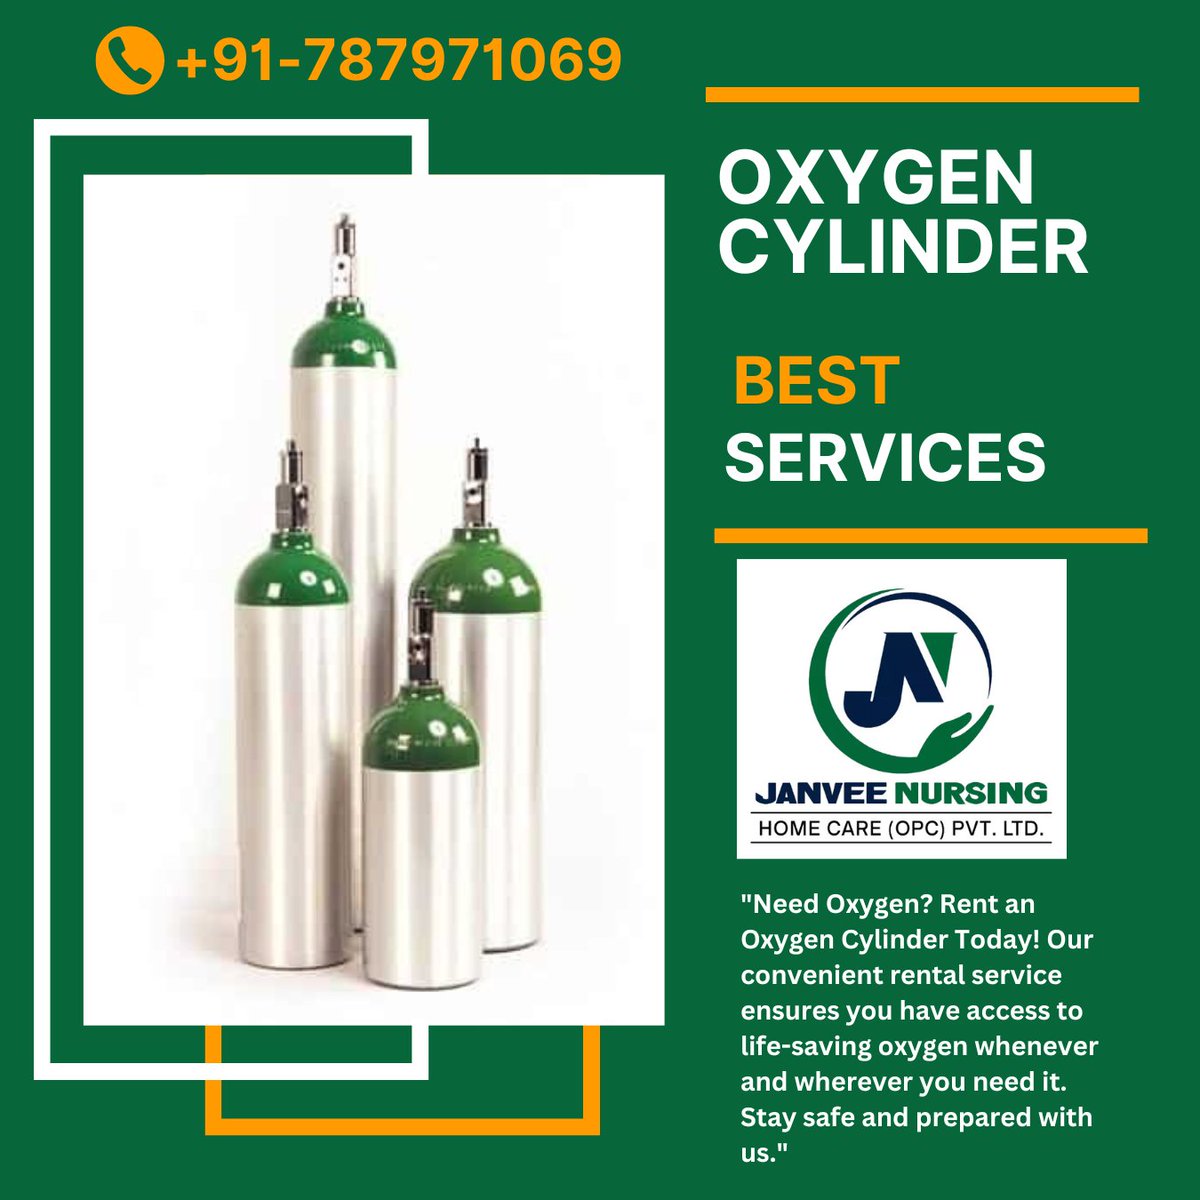 'Need Oxygen? Rent an Oxygen Cylinder Today! Our convenient rental service ensures you have access to life-saving oxygen whenever and wherever you need it. Stay safe and prepared with us.'
#oxygencylinder